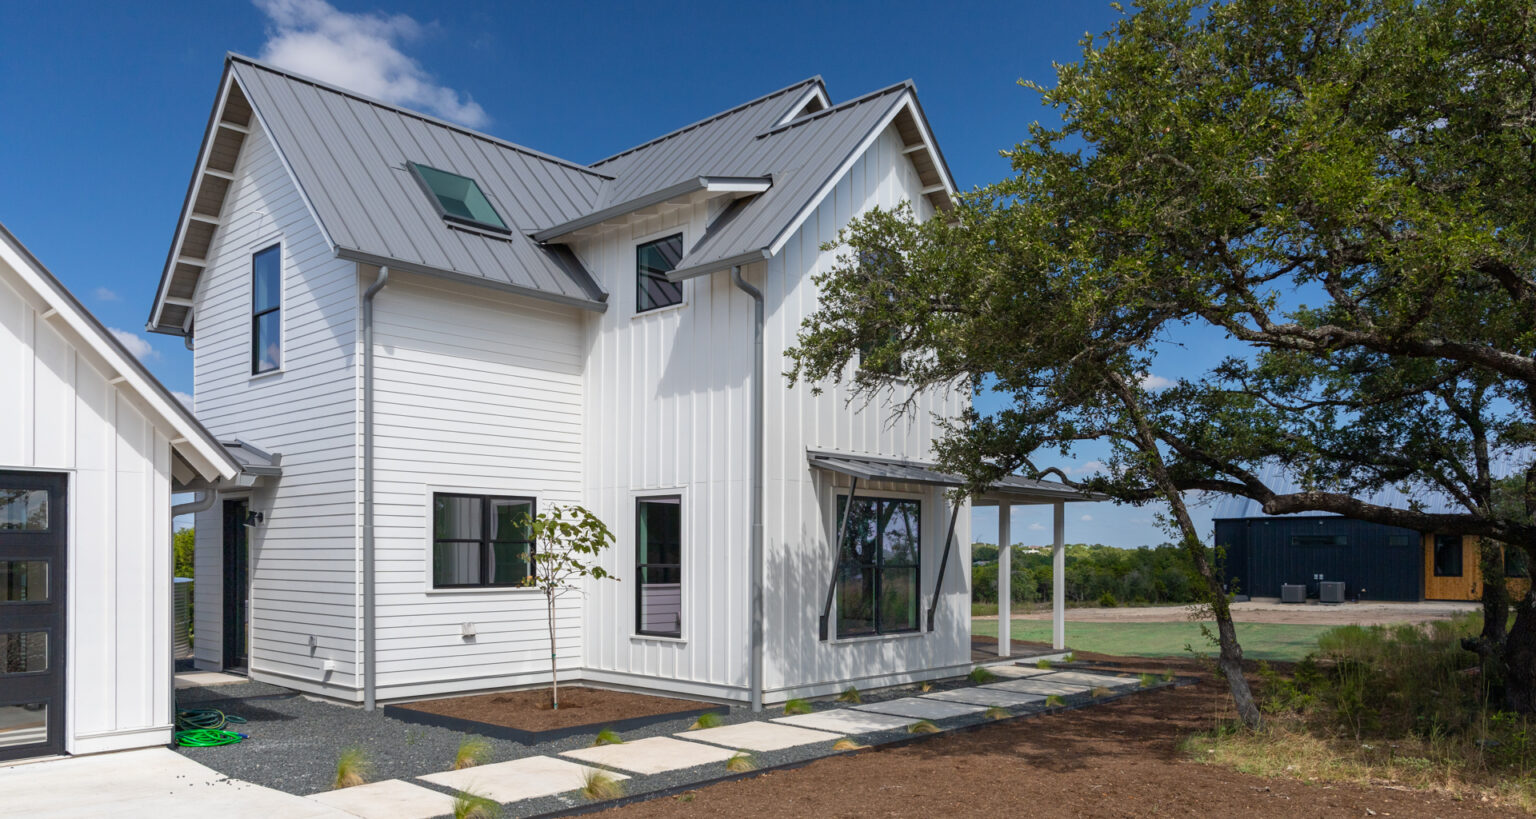 modern farmhouse in 2020? This build by Strong Roots Development in Austin, Texas